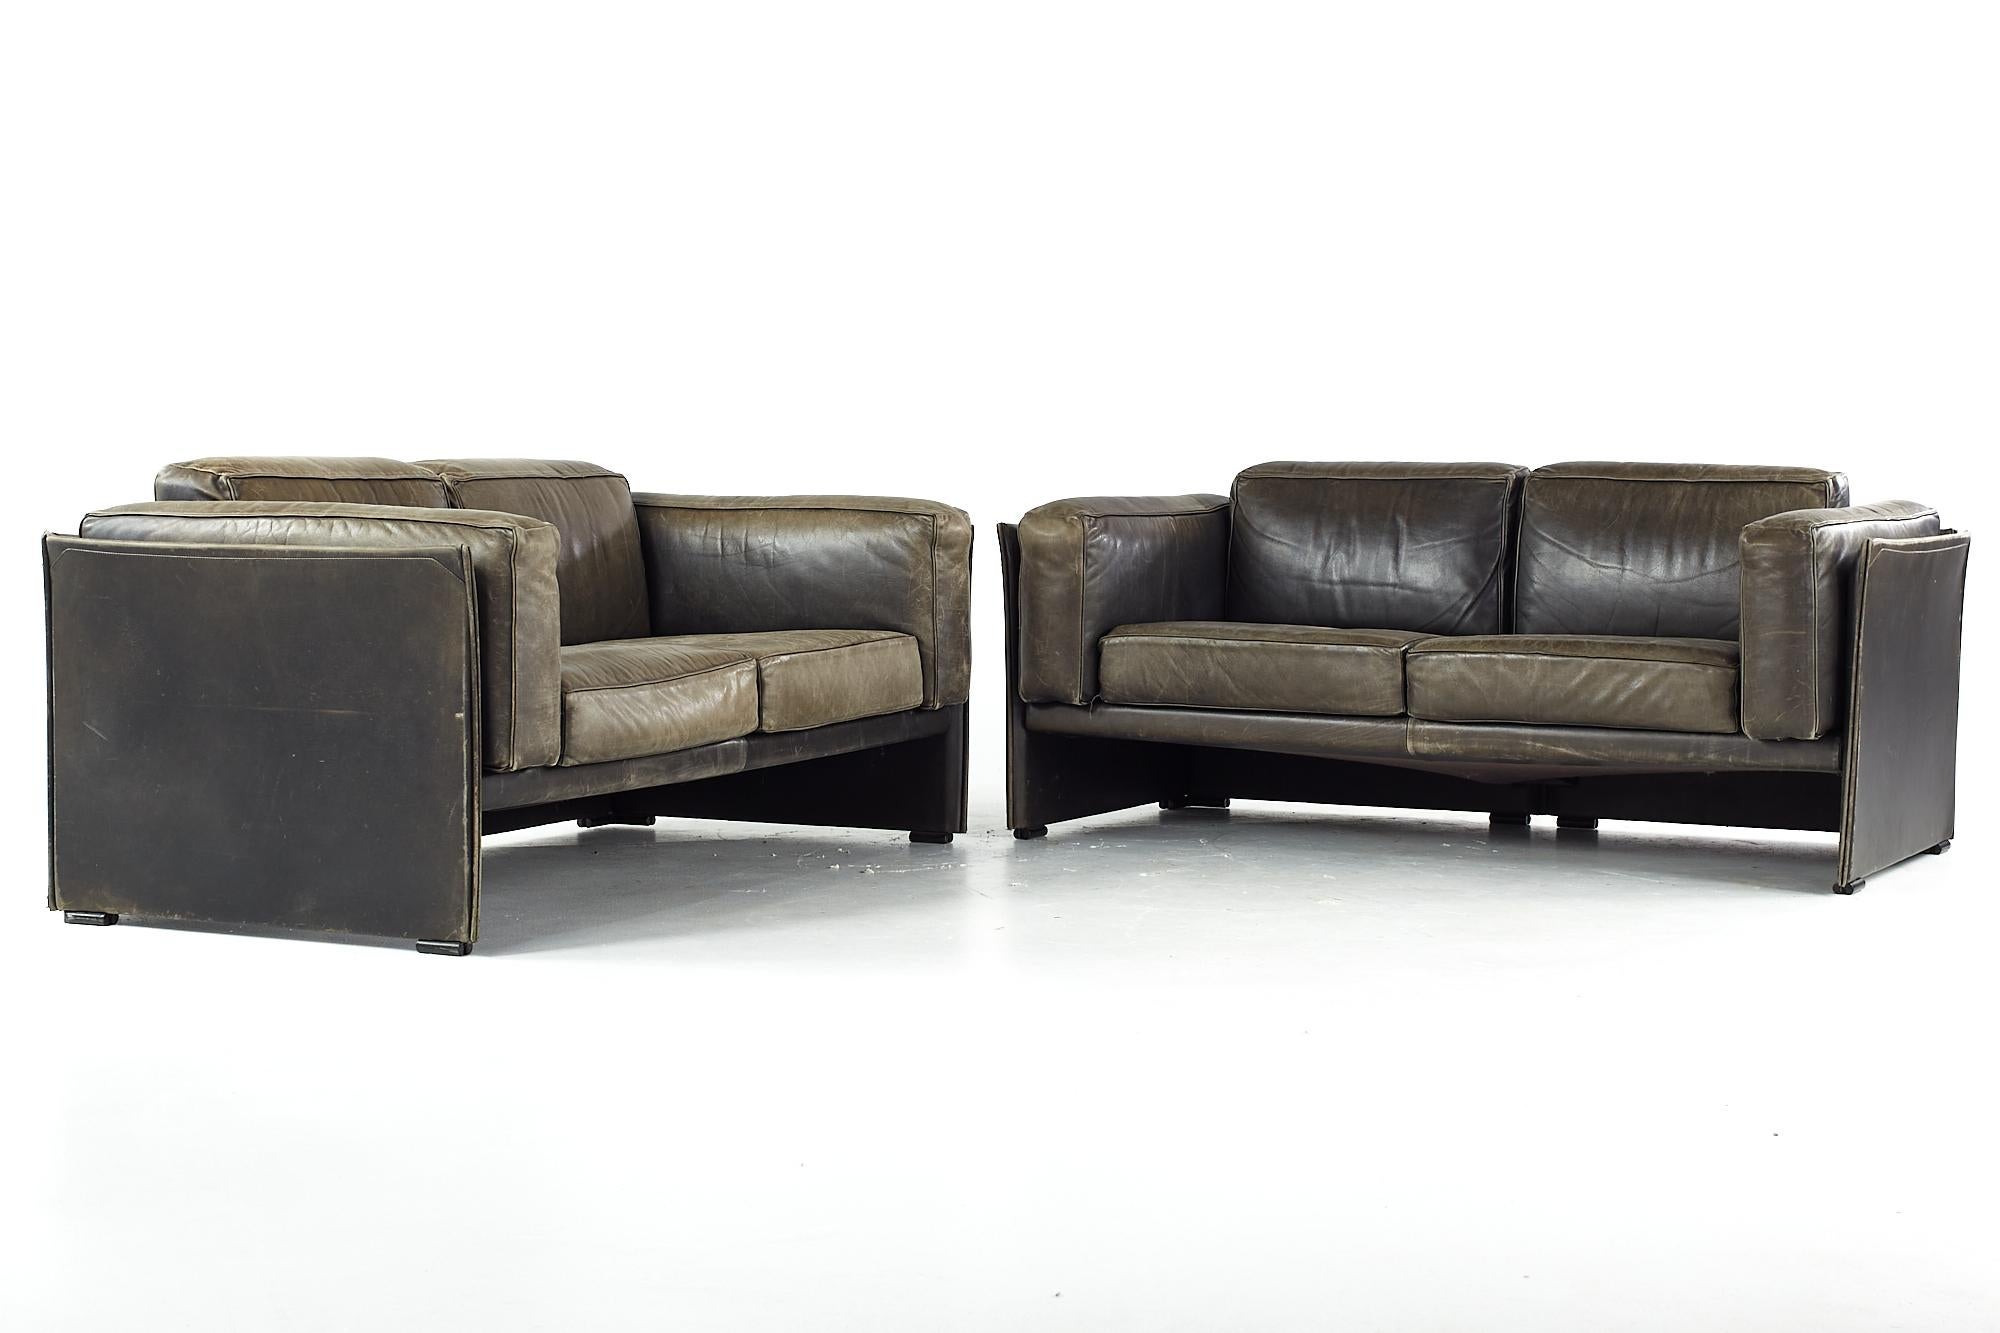 Afra and Tobia Scarpa for Cassina midcentury italian leather sofas - pair.

Each sofa measures: 64 wide x 32.5 deep x 27 inches high, with a seat height of 16 and arm height of 24.5 inches

All pieces of furniture can be had in what we call